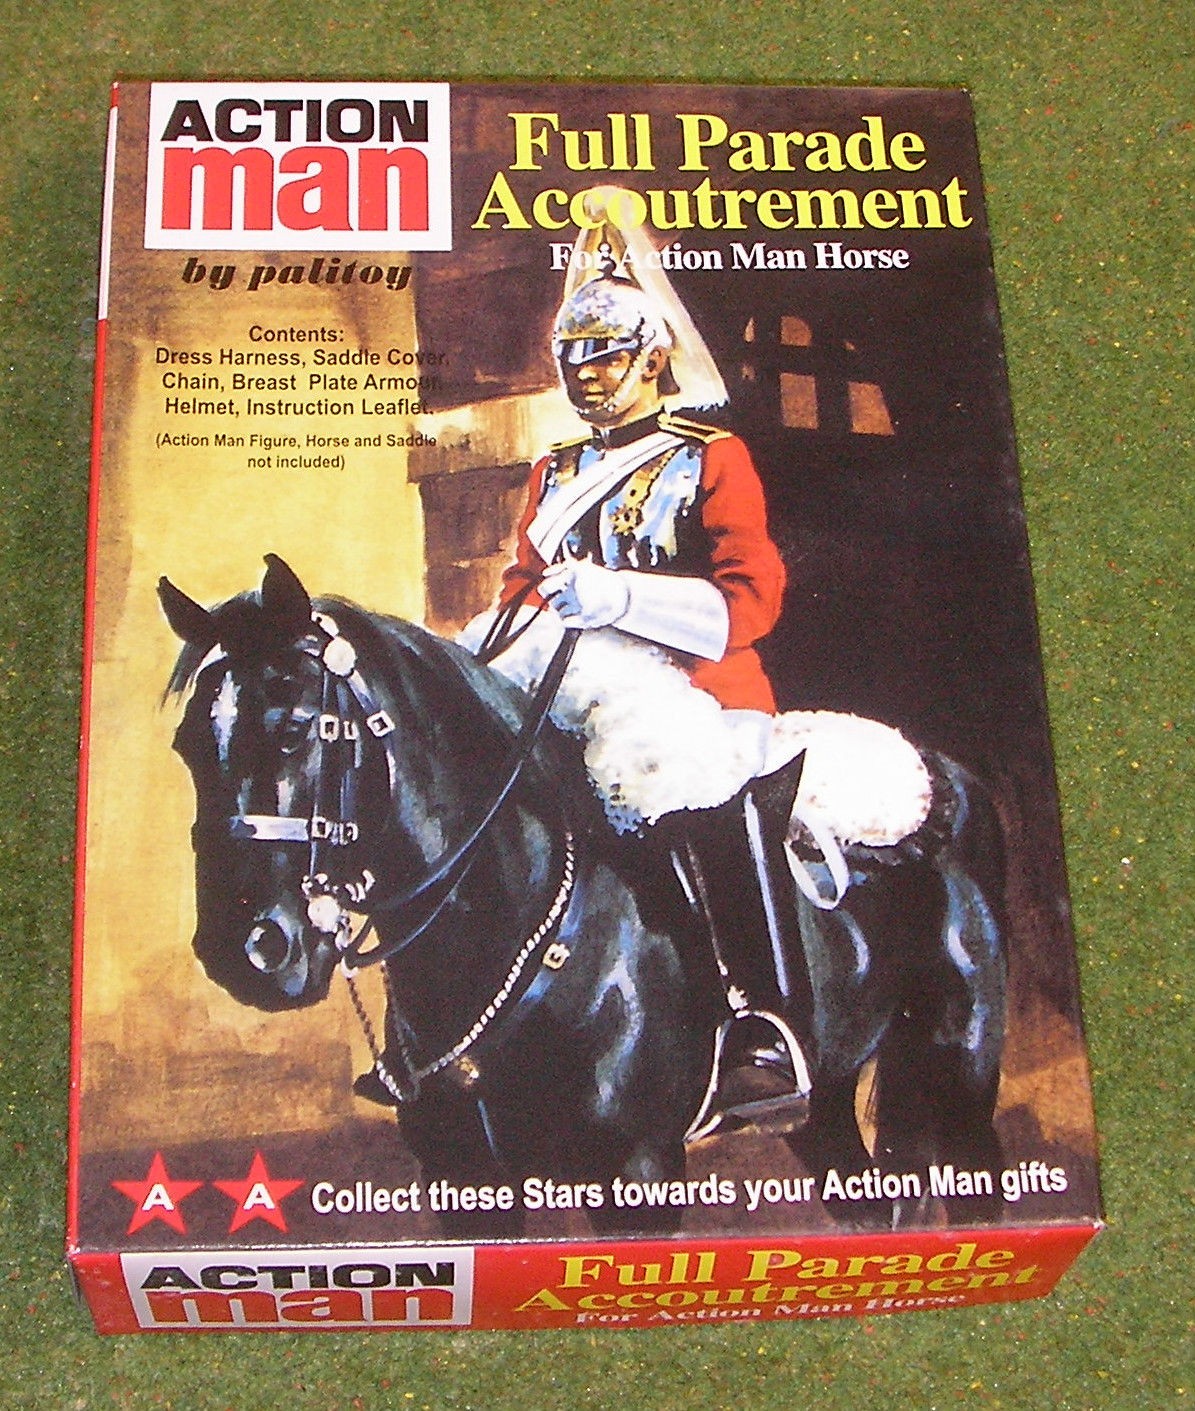 VINTAGE ACTION MAN 40th BOXED FULL PARADE ACCOUTREMENT